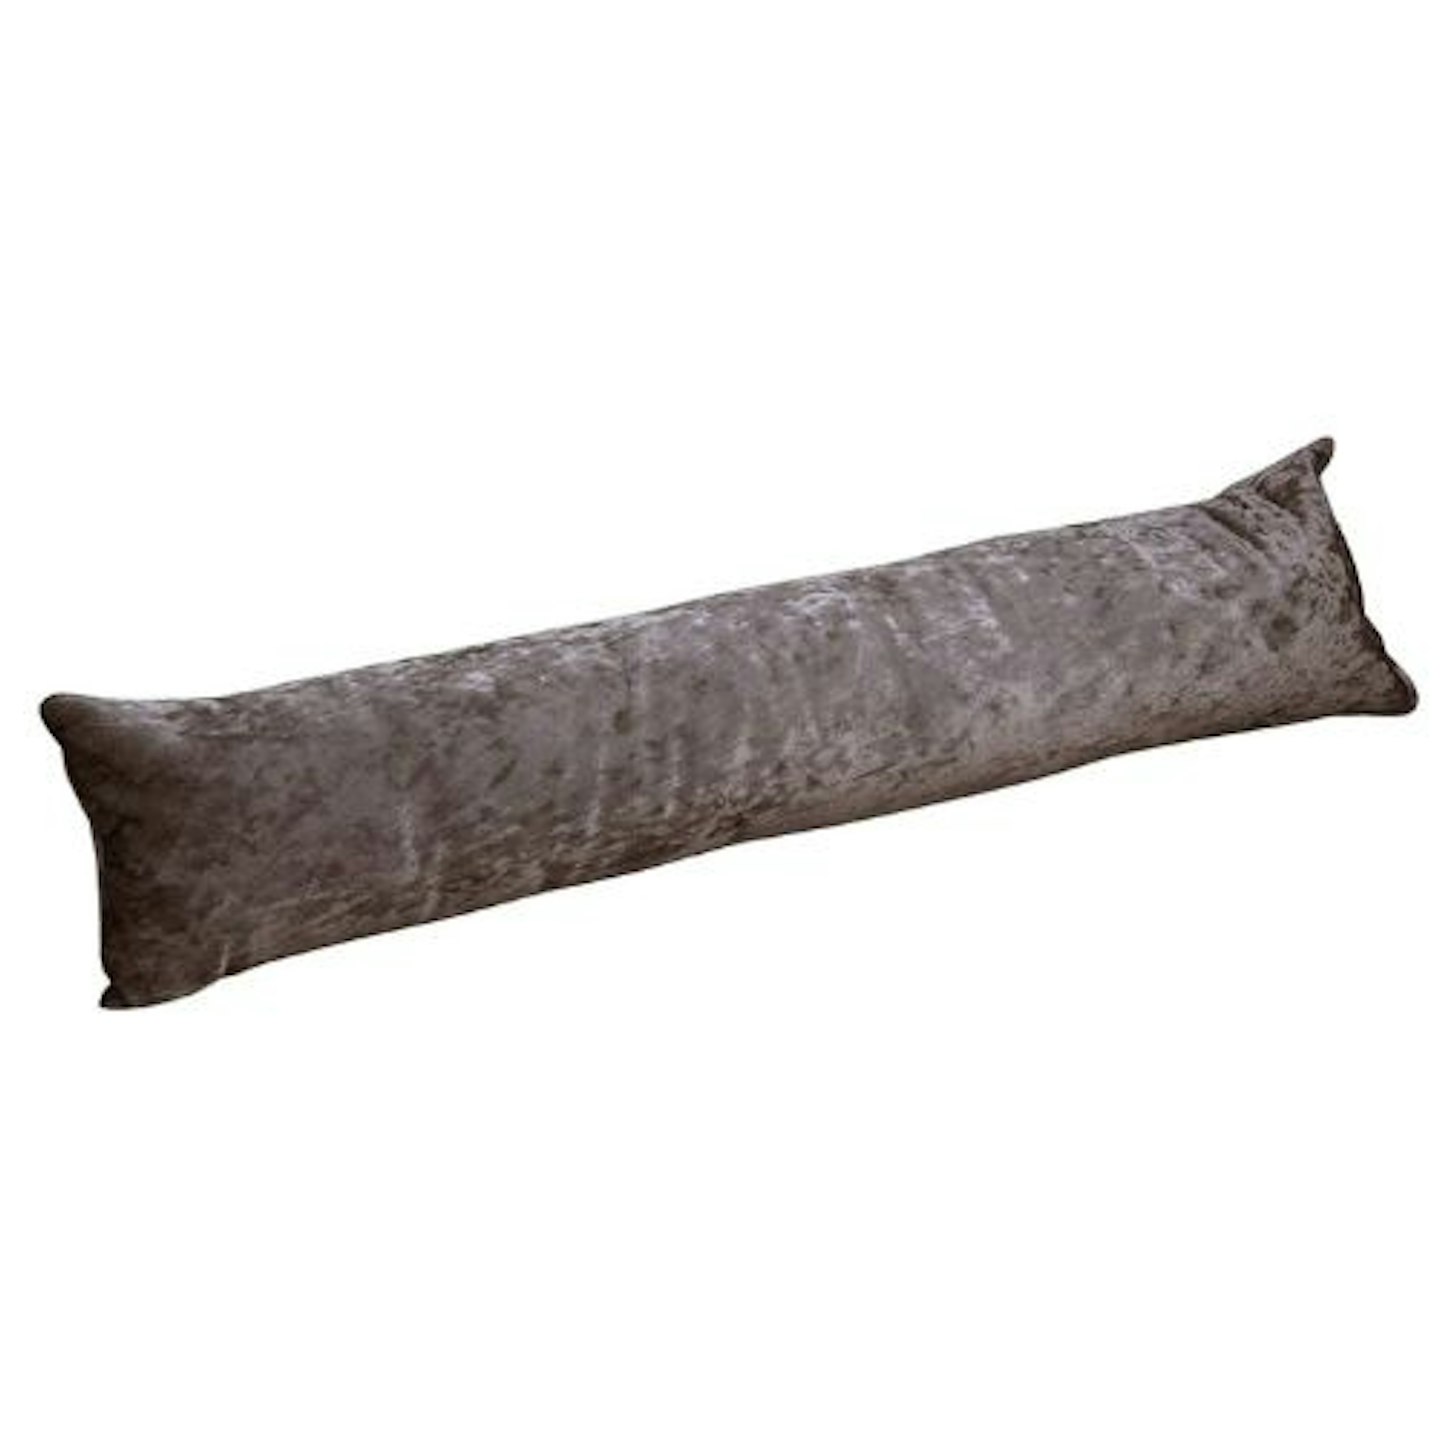 Original Sleep Company Faux Crushed Velvet Draught/Draft Excluder